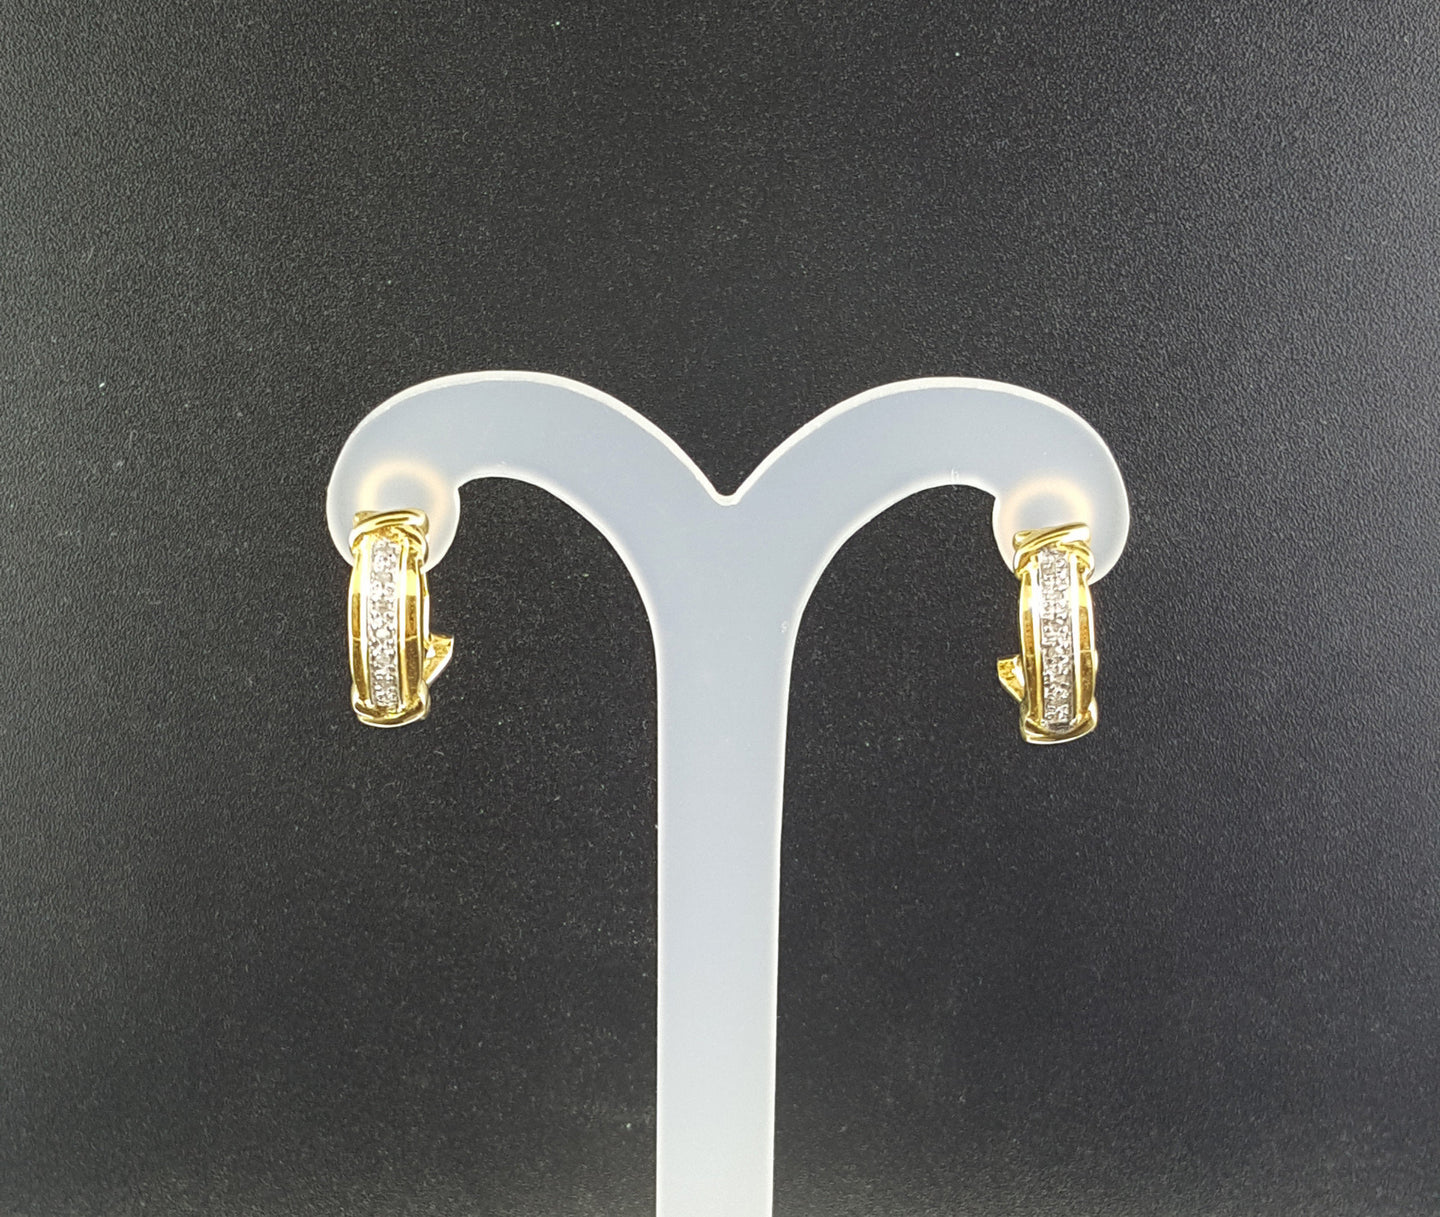 Gold-plated over sterling silver post earrings